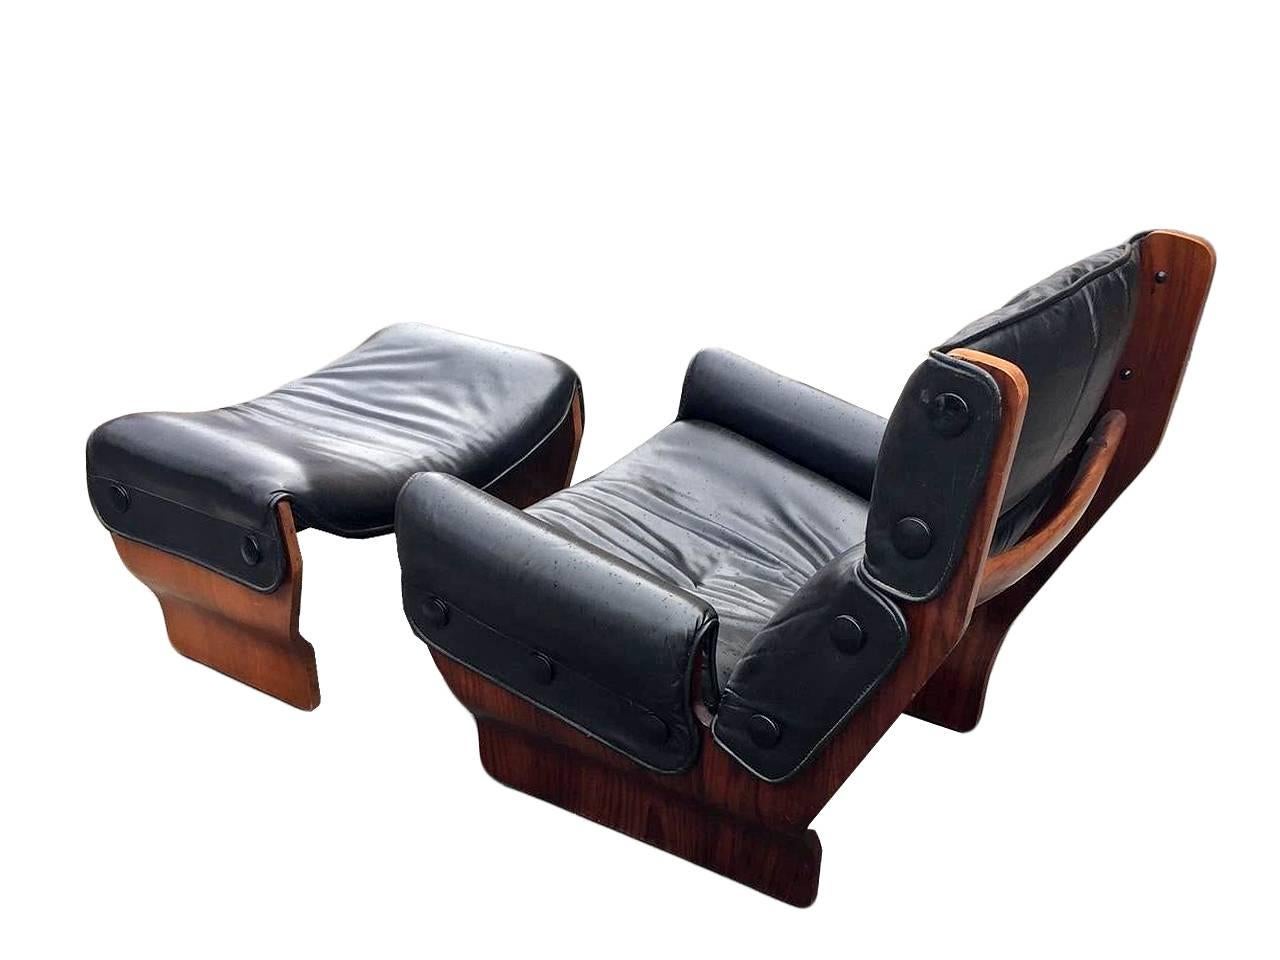 Armchair with Pouf, Design Osvaldo Borsani 1960
Frame in rosewood, covered in black leather, in perfect condition, produced by Tecno, model Canada.